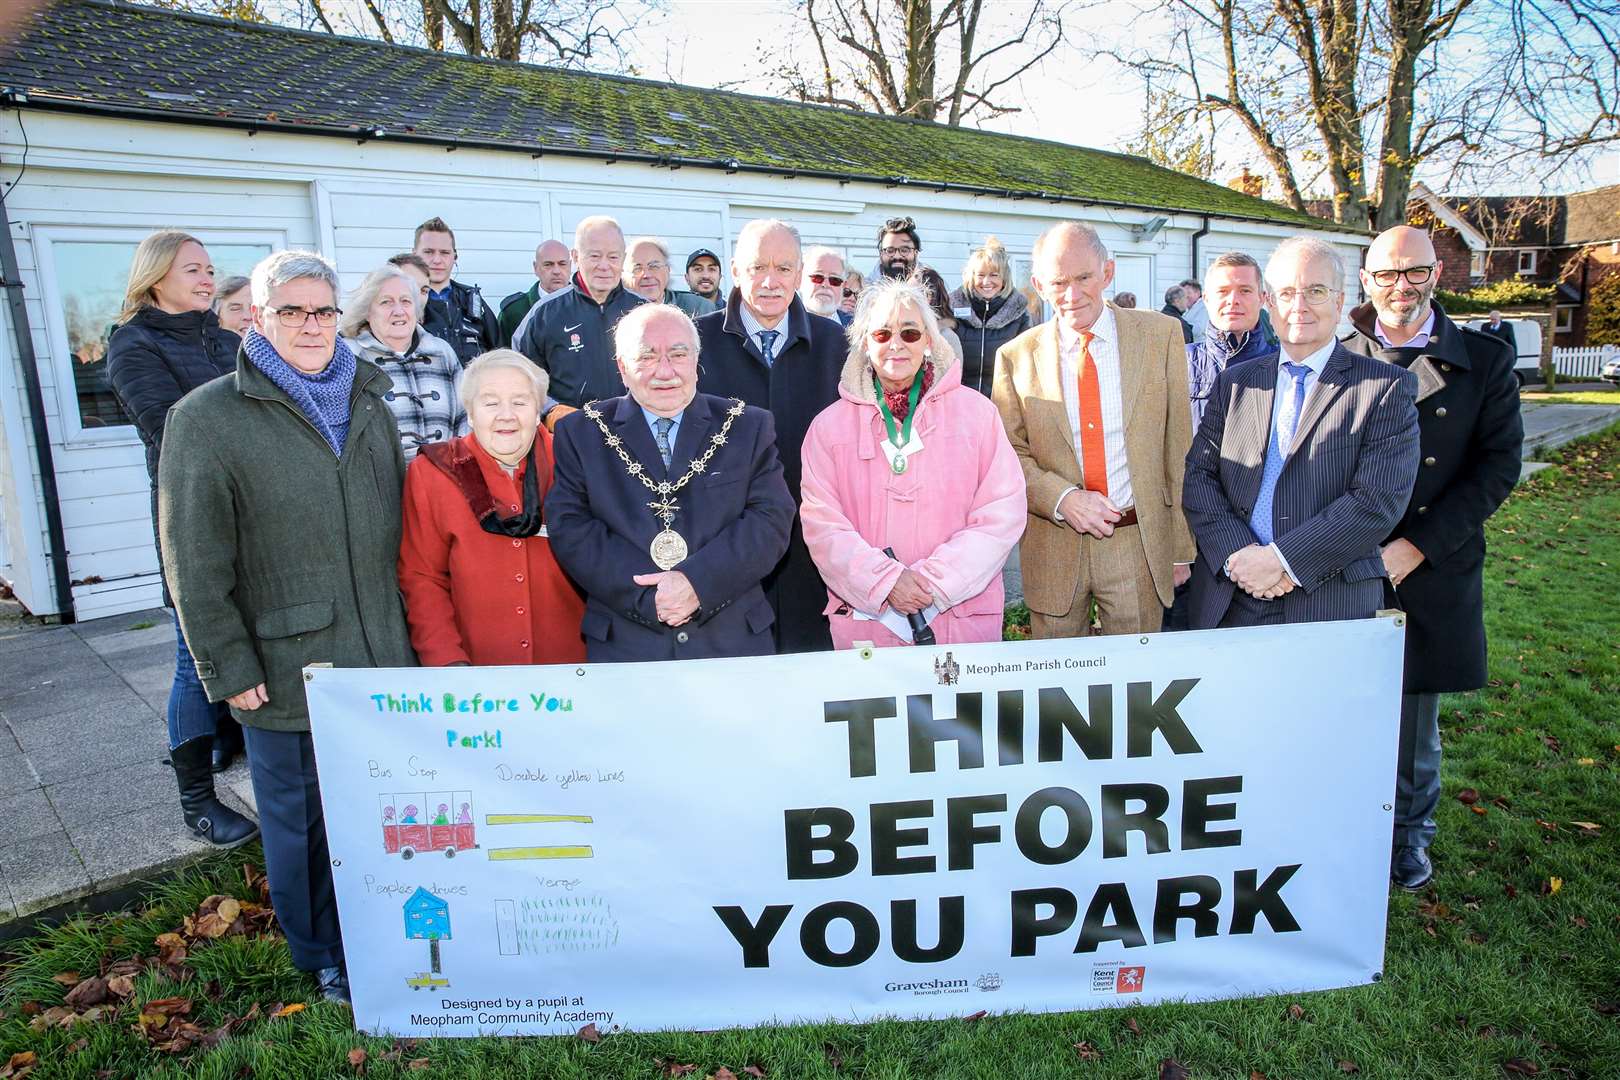 Launch of Parking Safety Campaign, Meopham Cricket Pavillion. Group shot including Mayor of Gravesham Cllr Harold Craske, KCC Cllr Brian Sweetland, chairman of Meopham Parish Council Sheila Buchanan, and David Brazier KCC cabinet chairman.